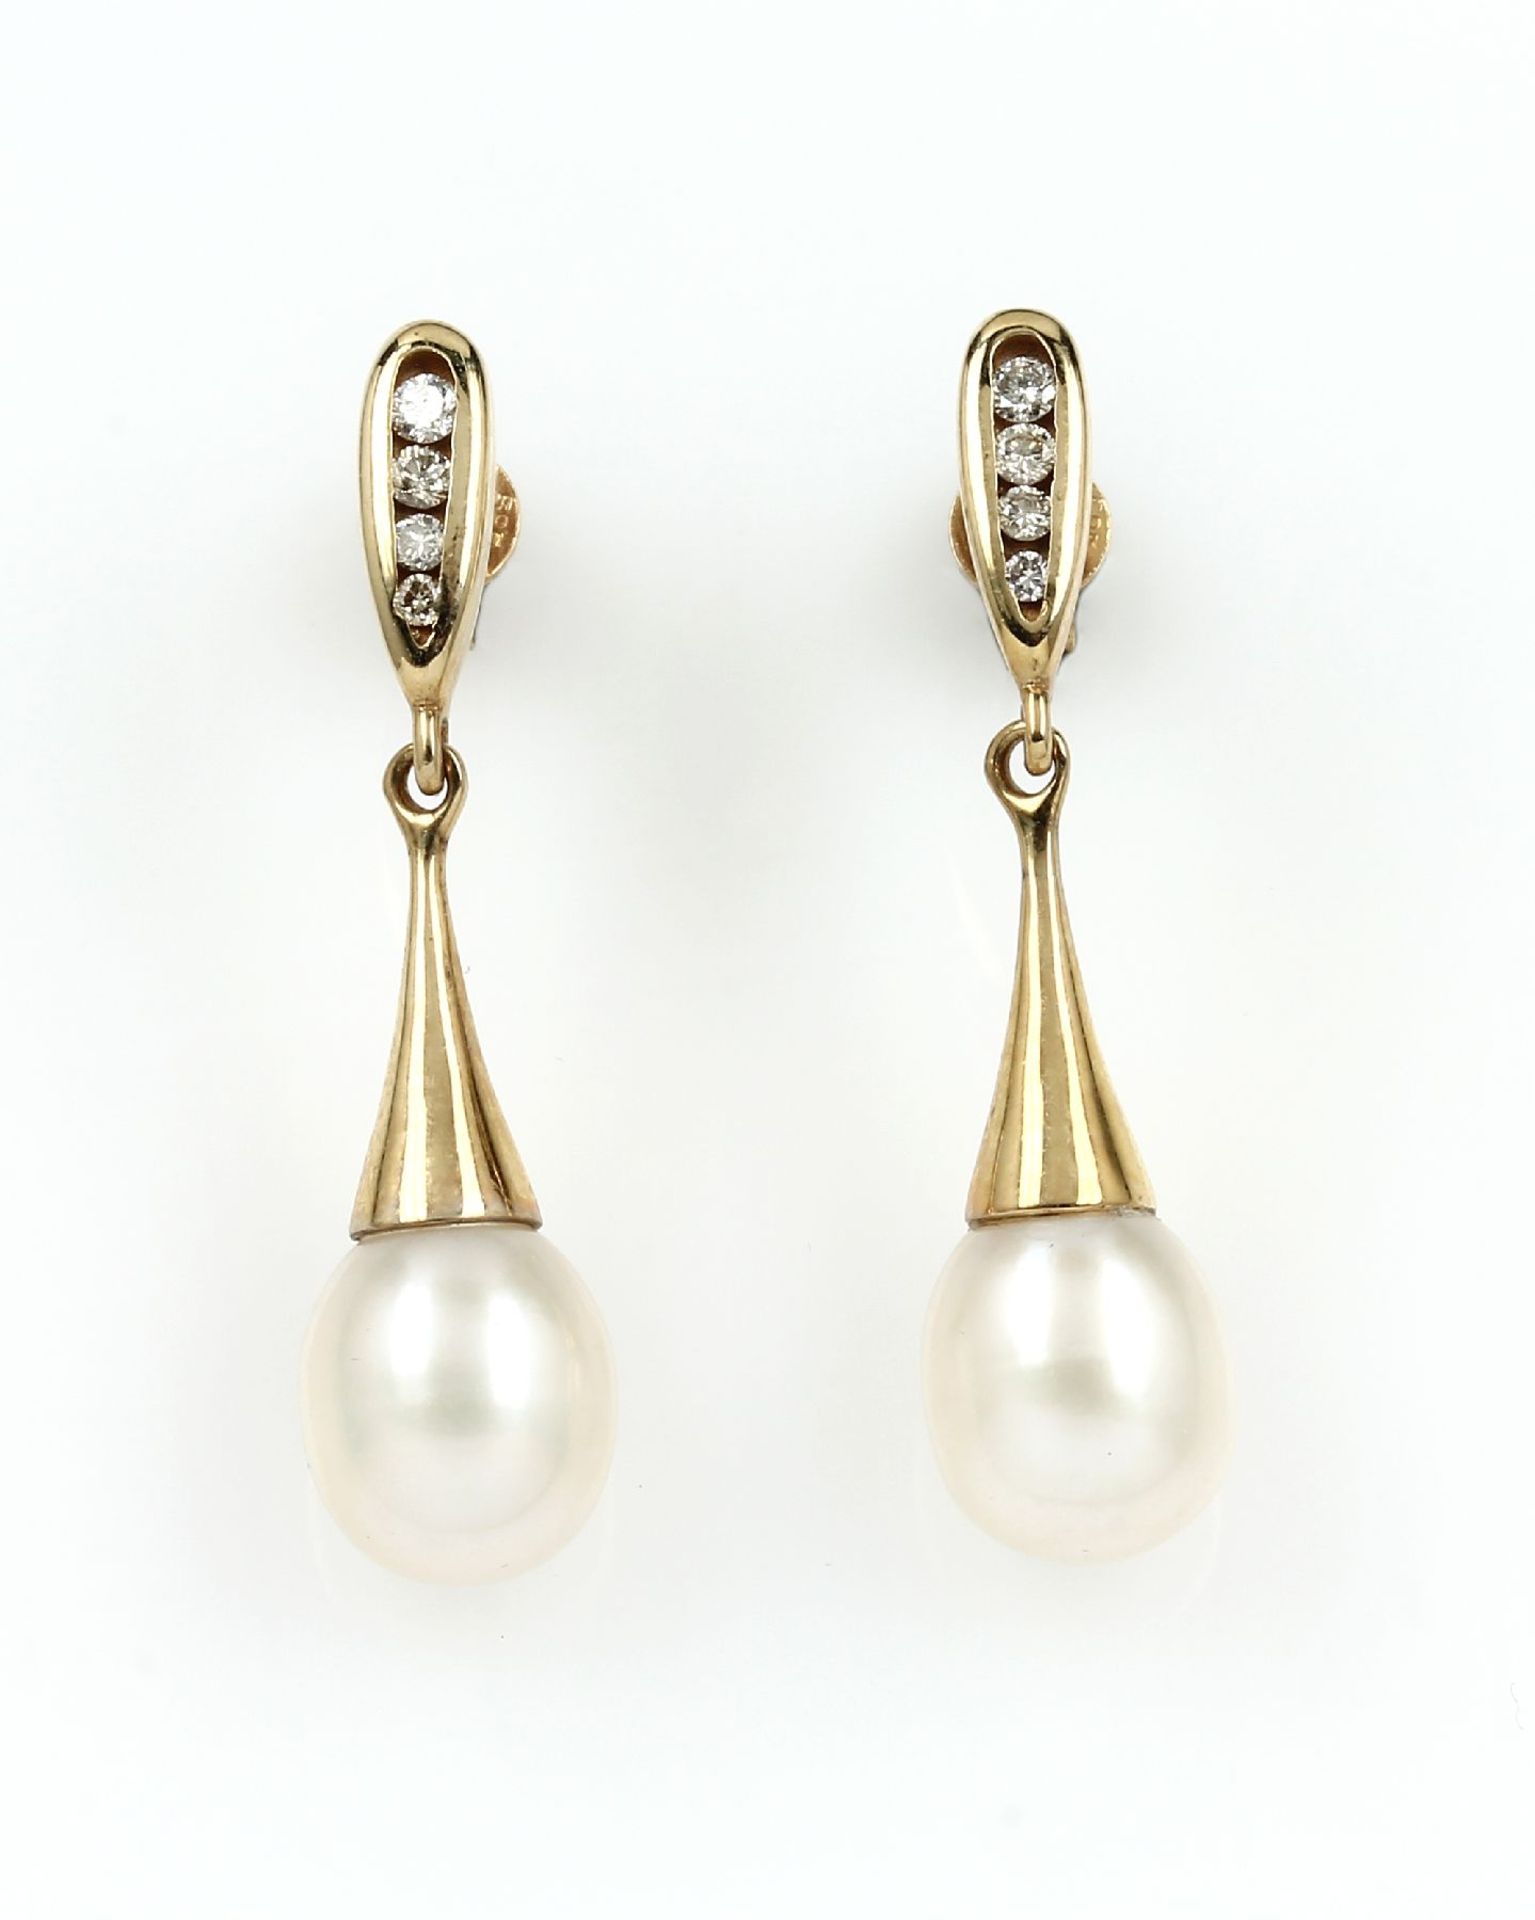 Pair of 14 kt gold earrings with brilliants and cultured fresh water pearls , YG 585/000, 8